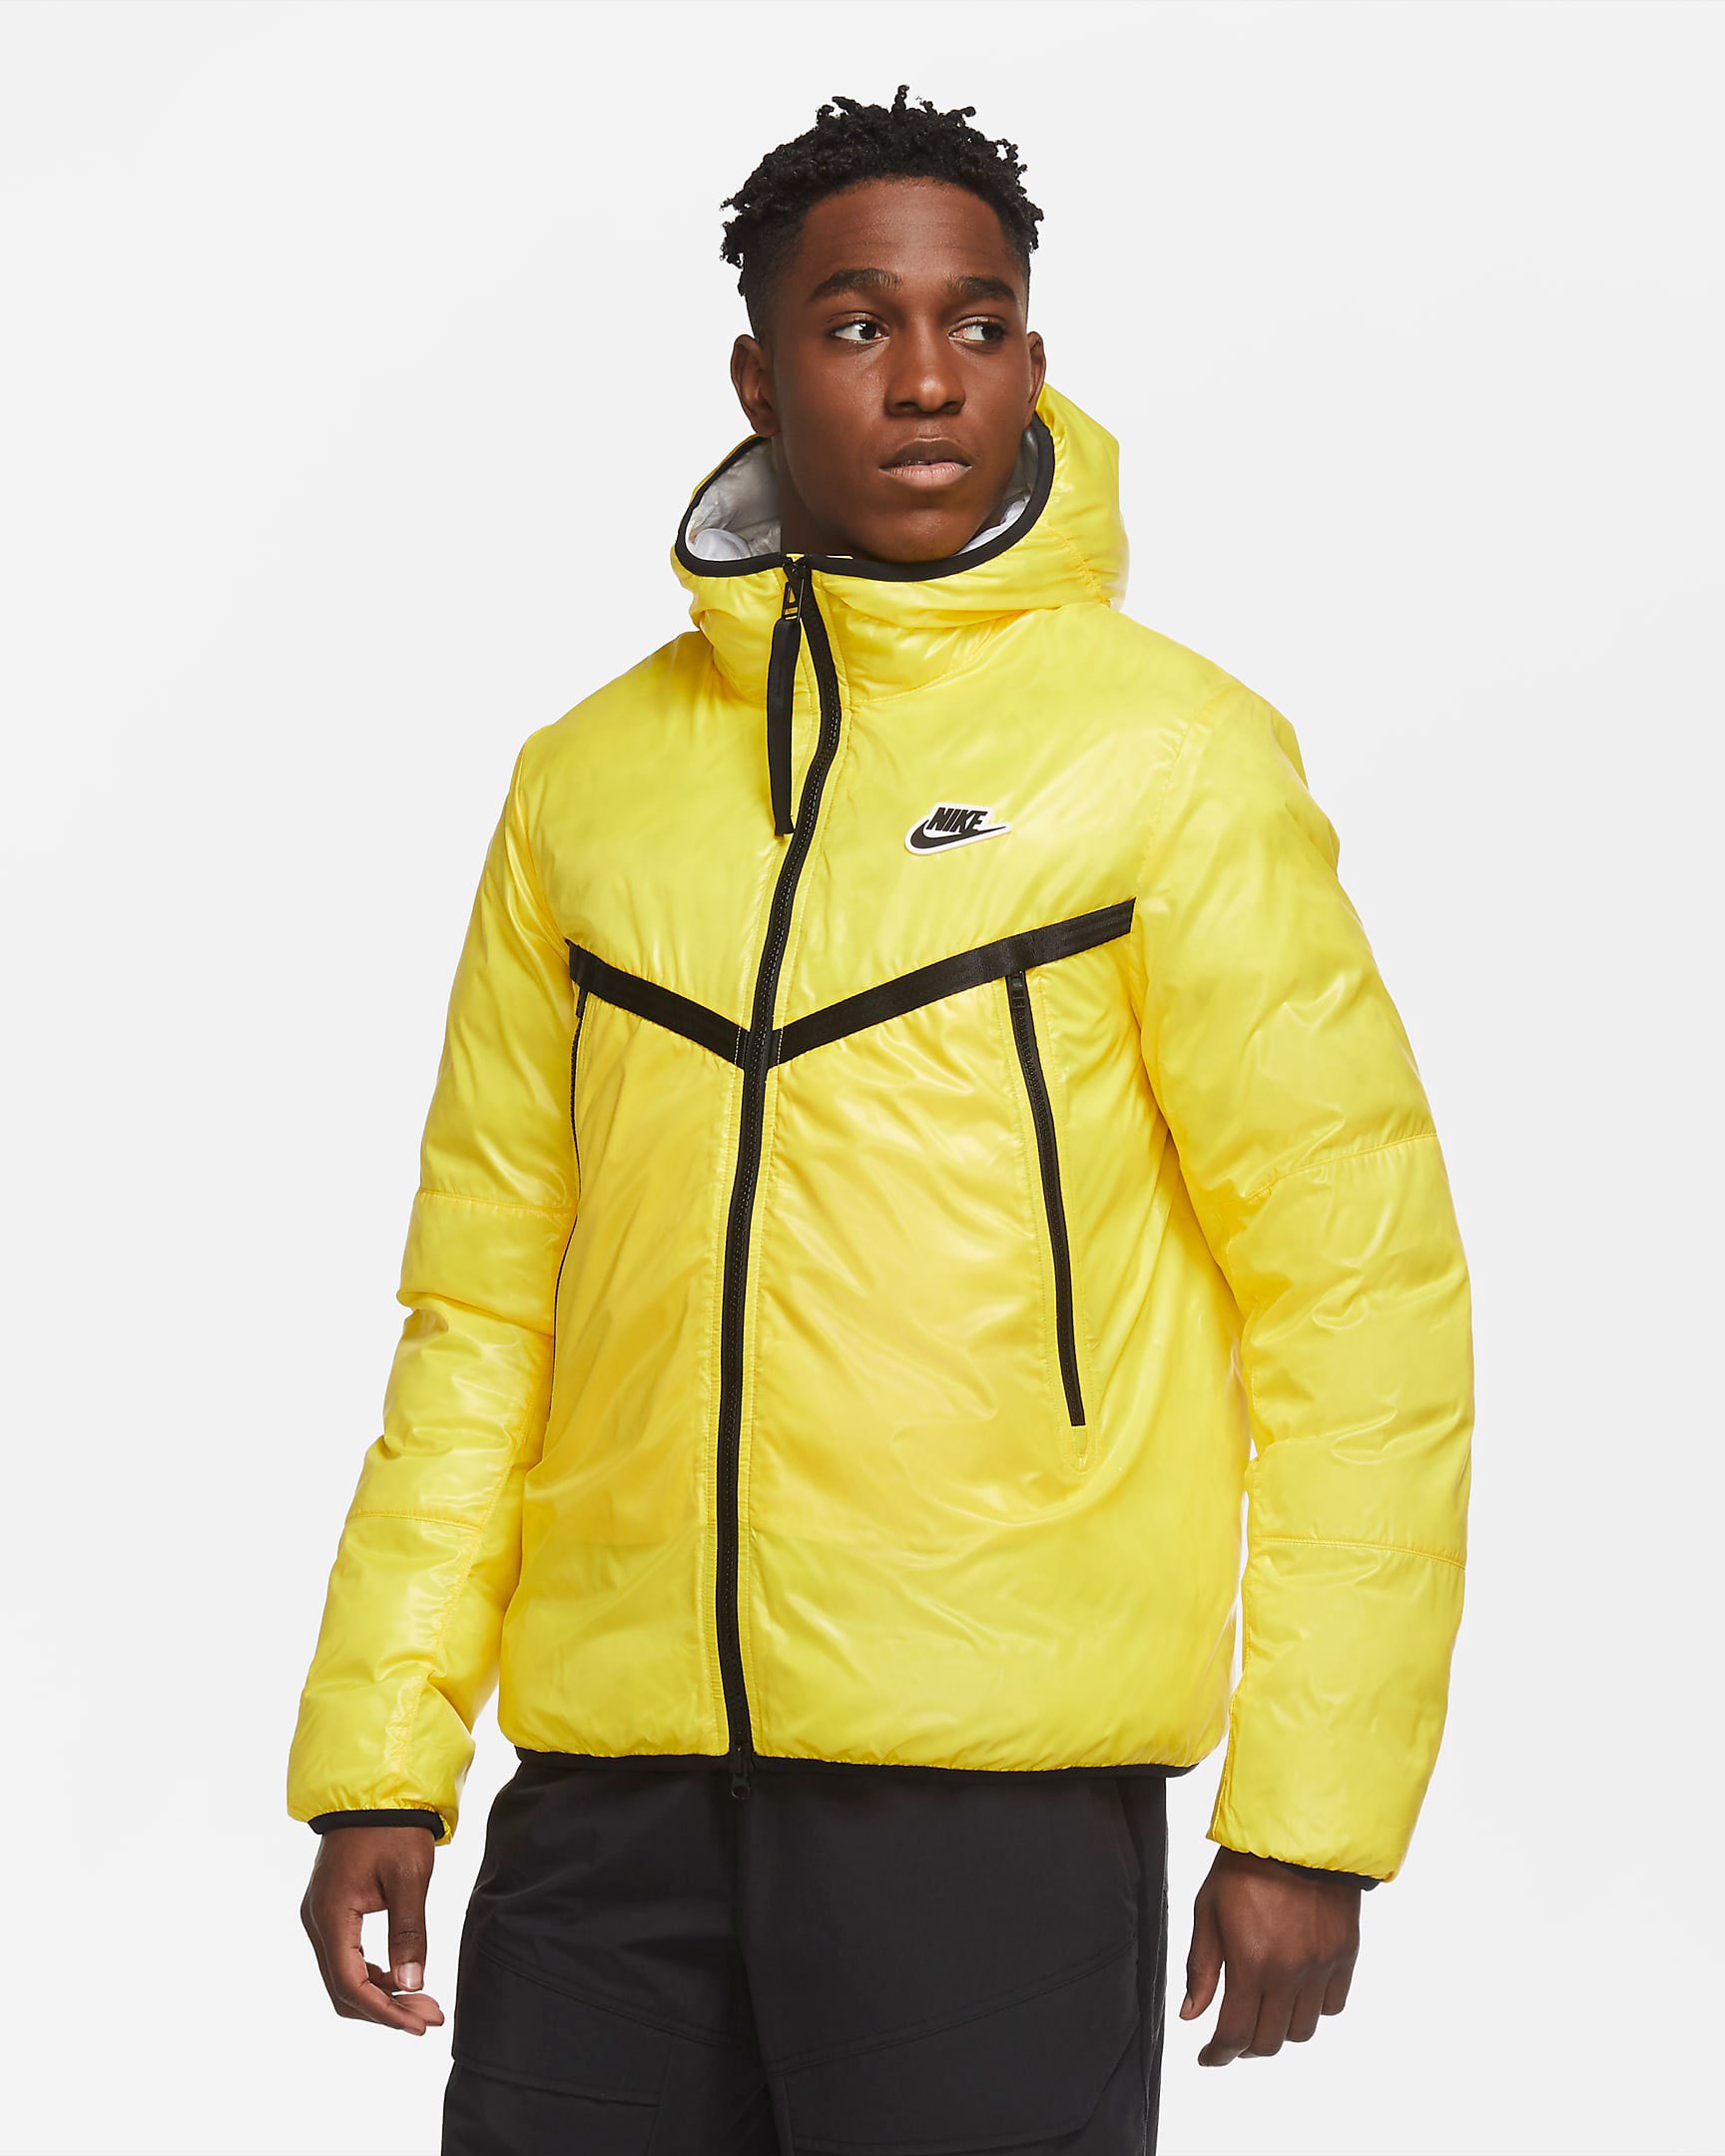 cube Consecutive priest Nike Sportswear Windrunner Repel Jackets for Fall 2020 | SneakerFits.com